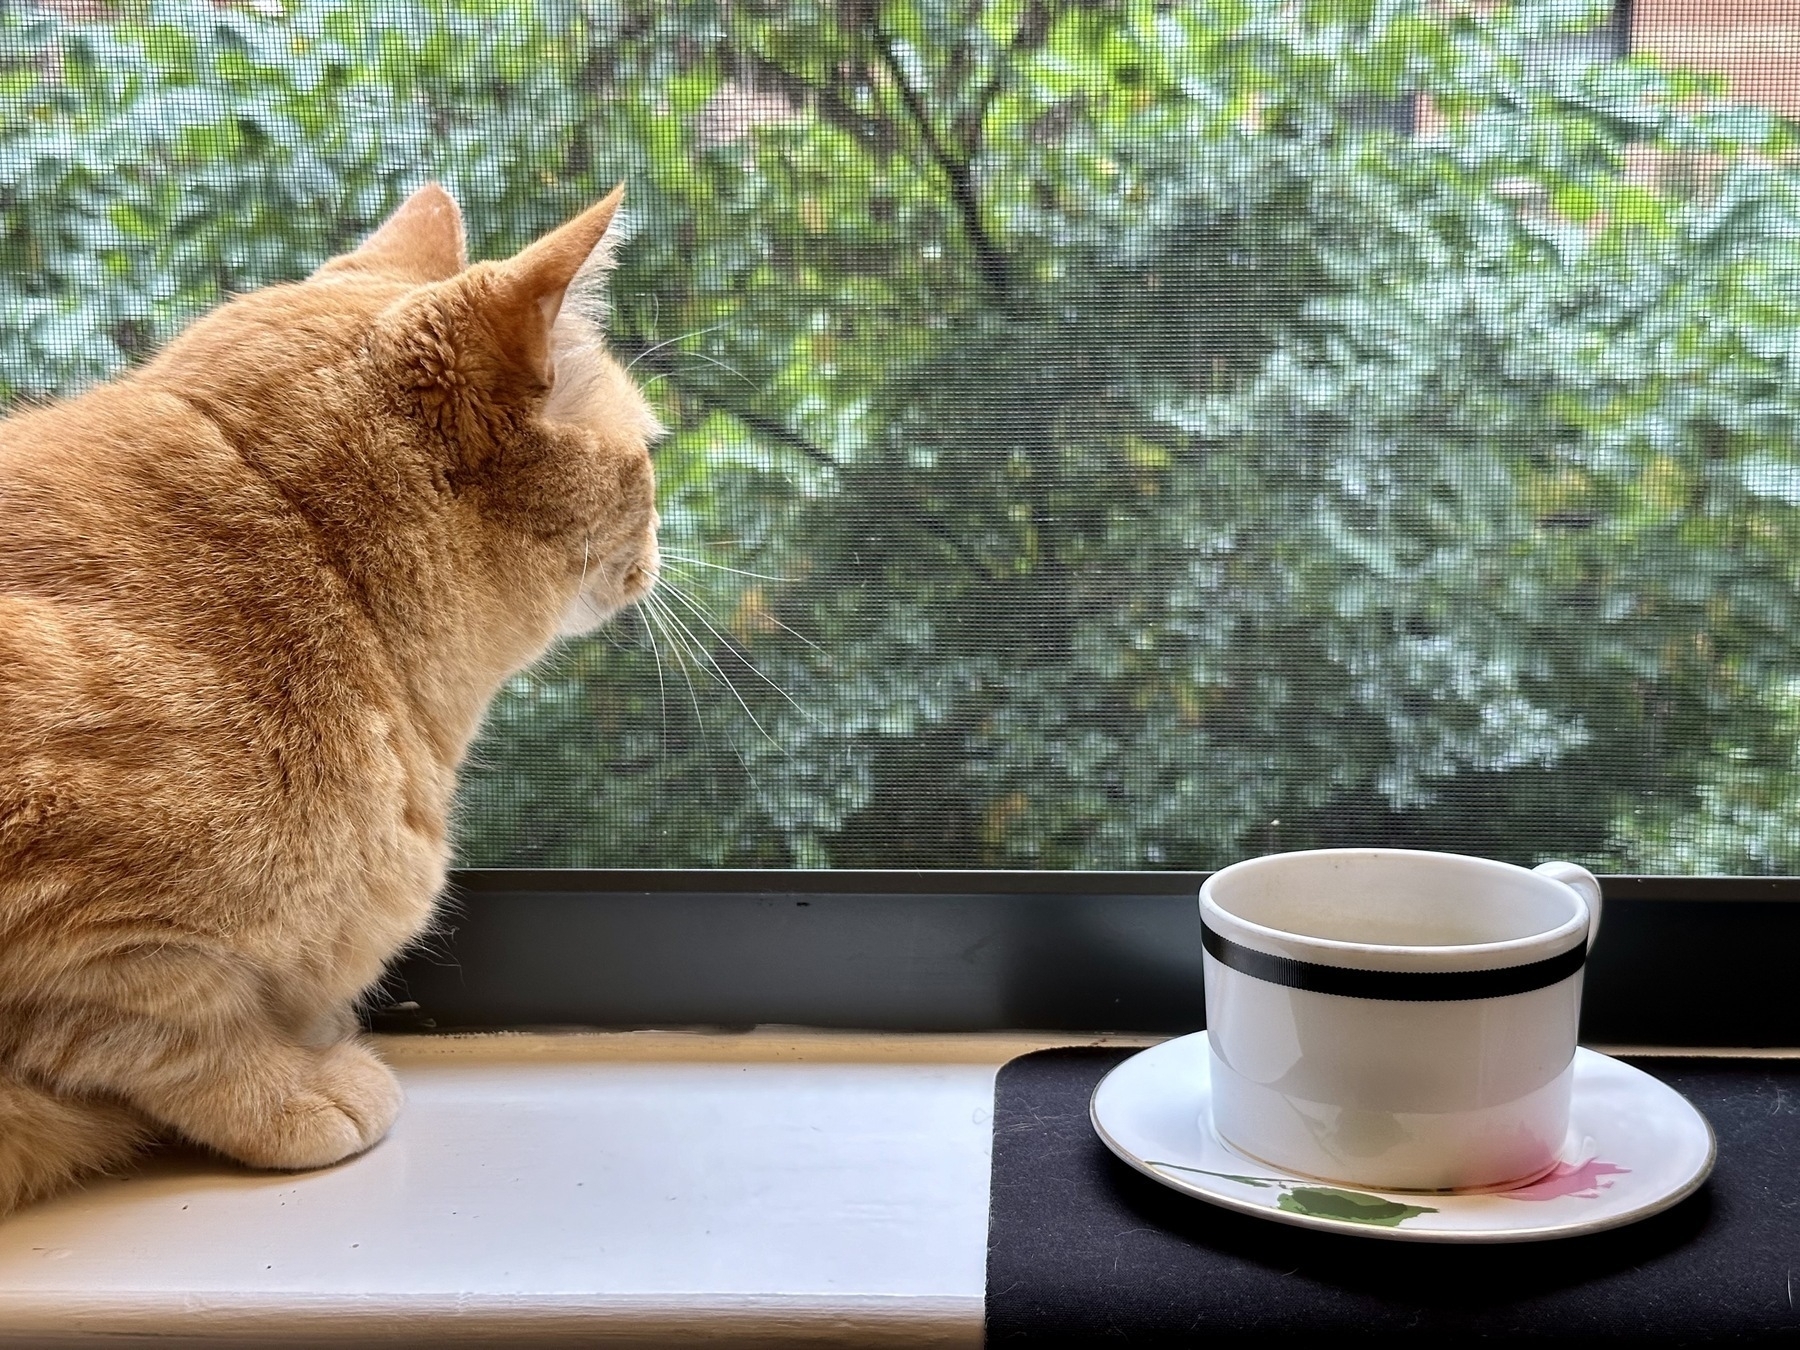 Photo of an orange tabby sitting on a window sill next to a coffee cup, looking out.